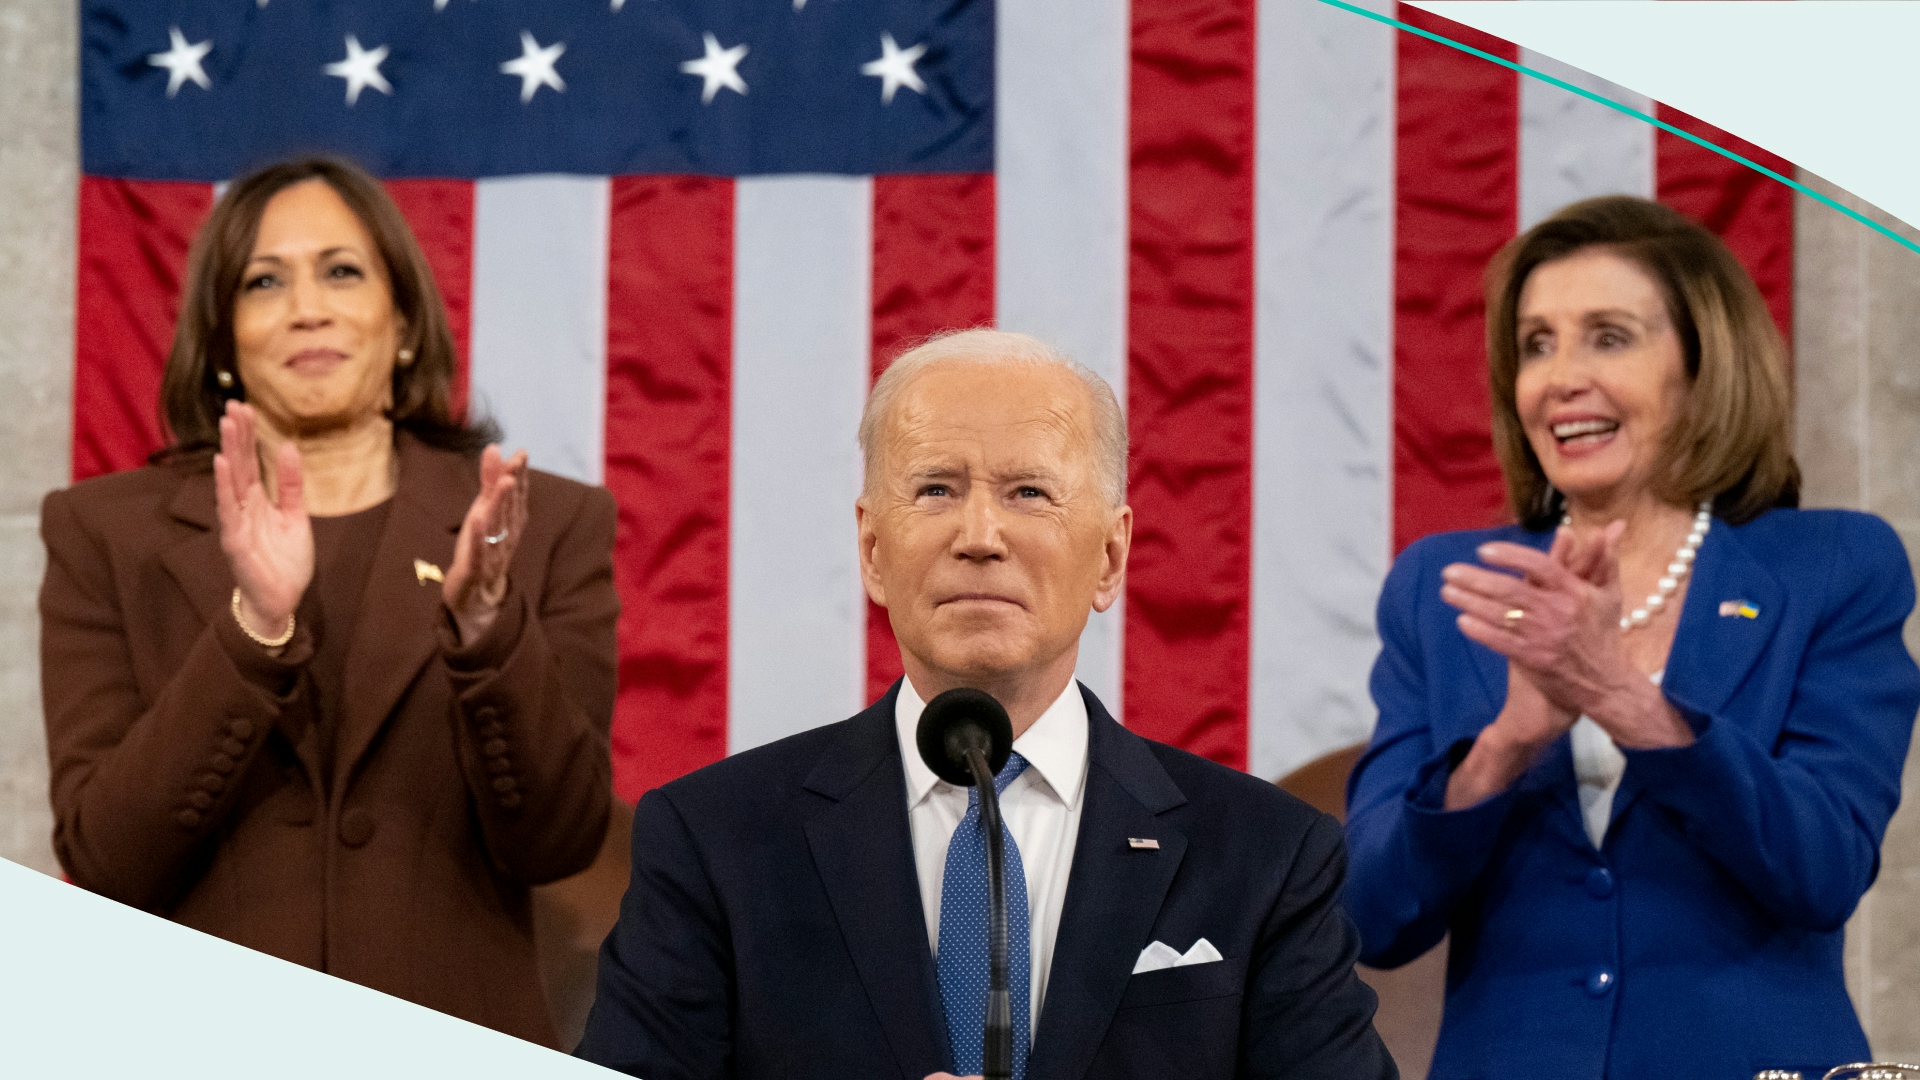 US President Joe Biden arrives to deliver the State of the Union address as U.S. Vice President Kamala Harris (L) and House Speaker Nancy Pelosi (D-CA) look on during a joint session of Congress in the U.S. Capitol House Chamber